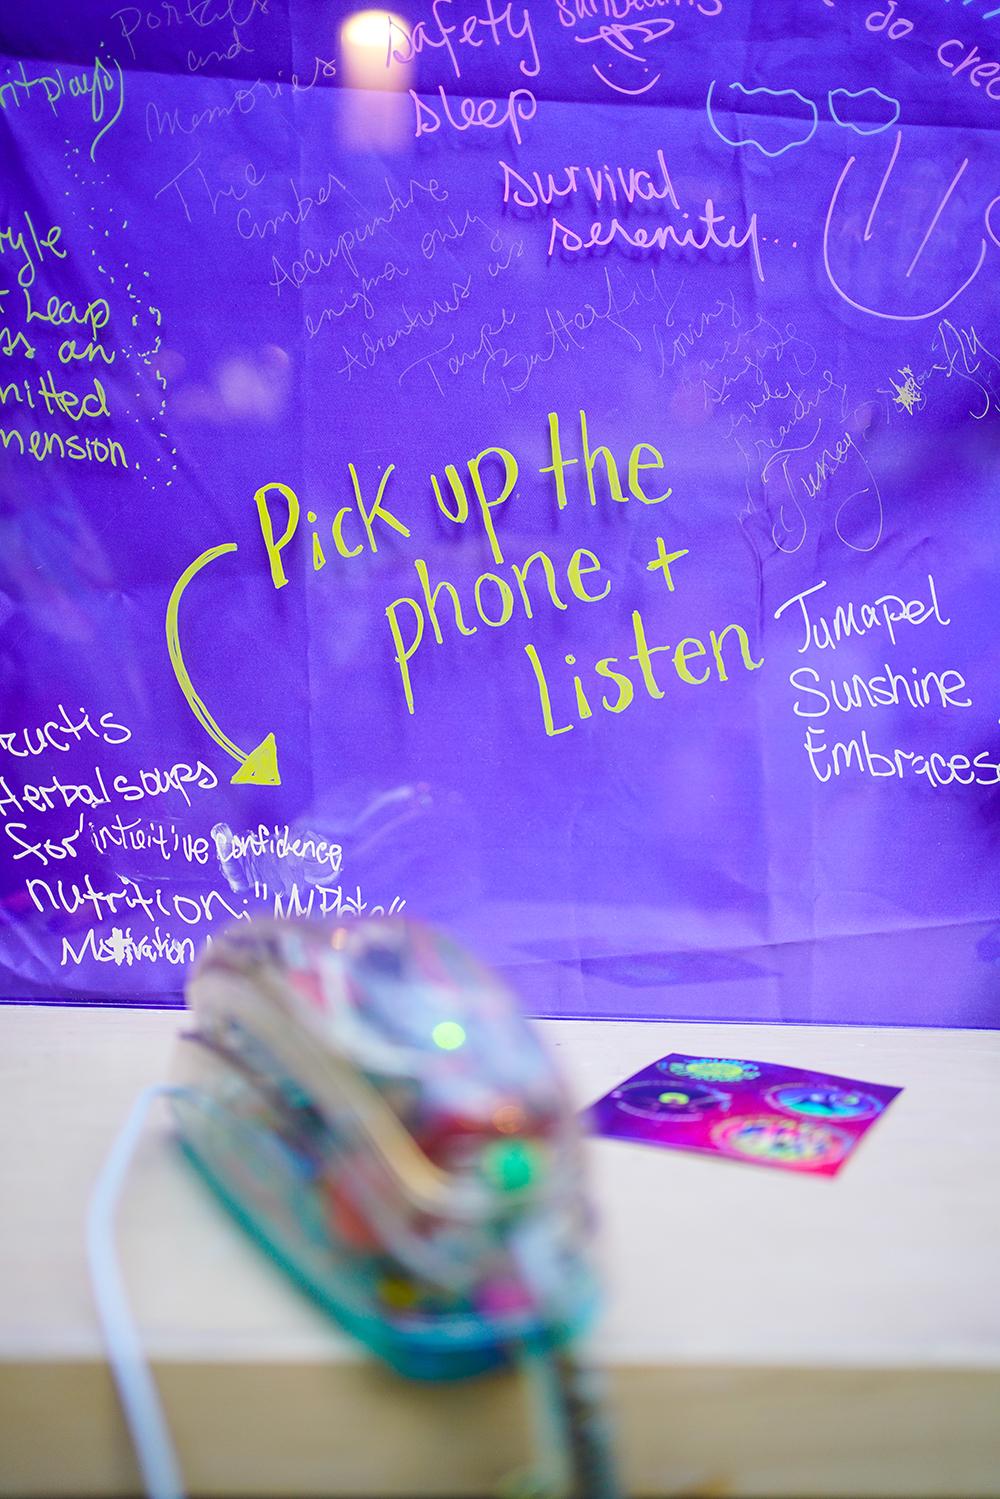 A multi-colored, chorded phone sits on a table in front of a sign that reads "pick up the phone and listen."